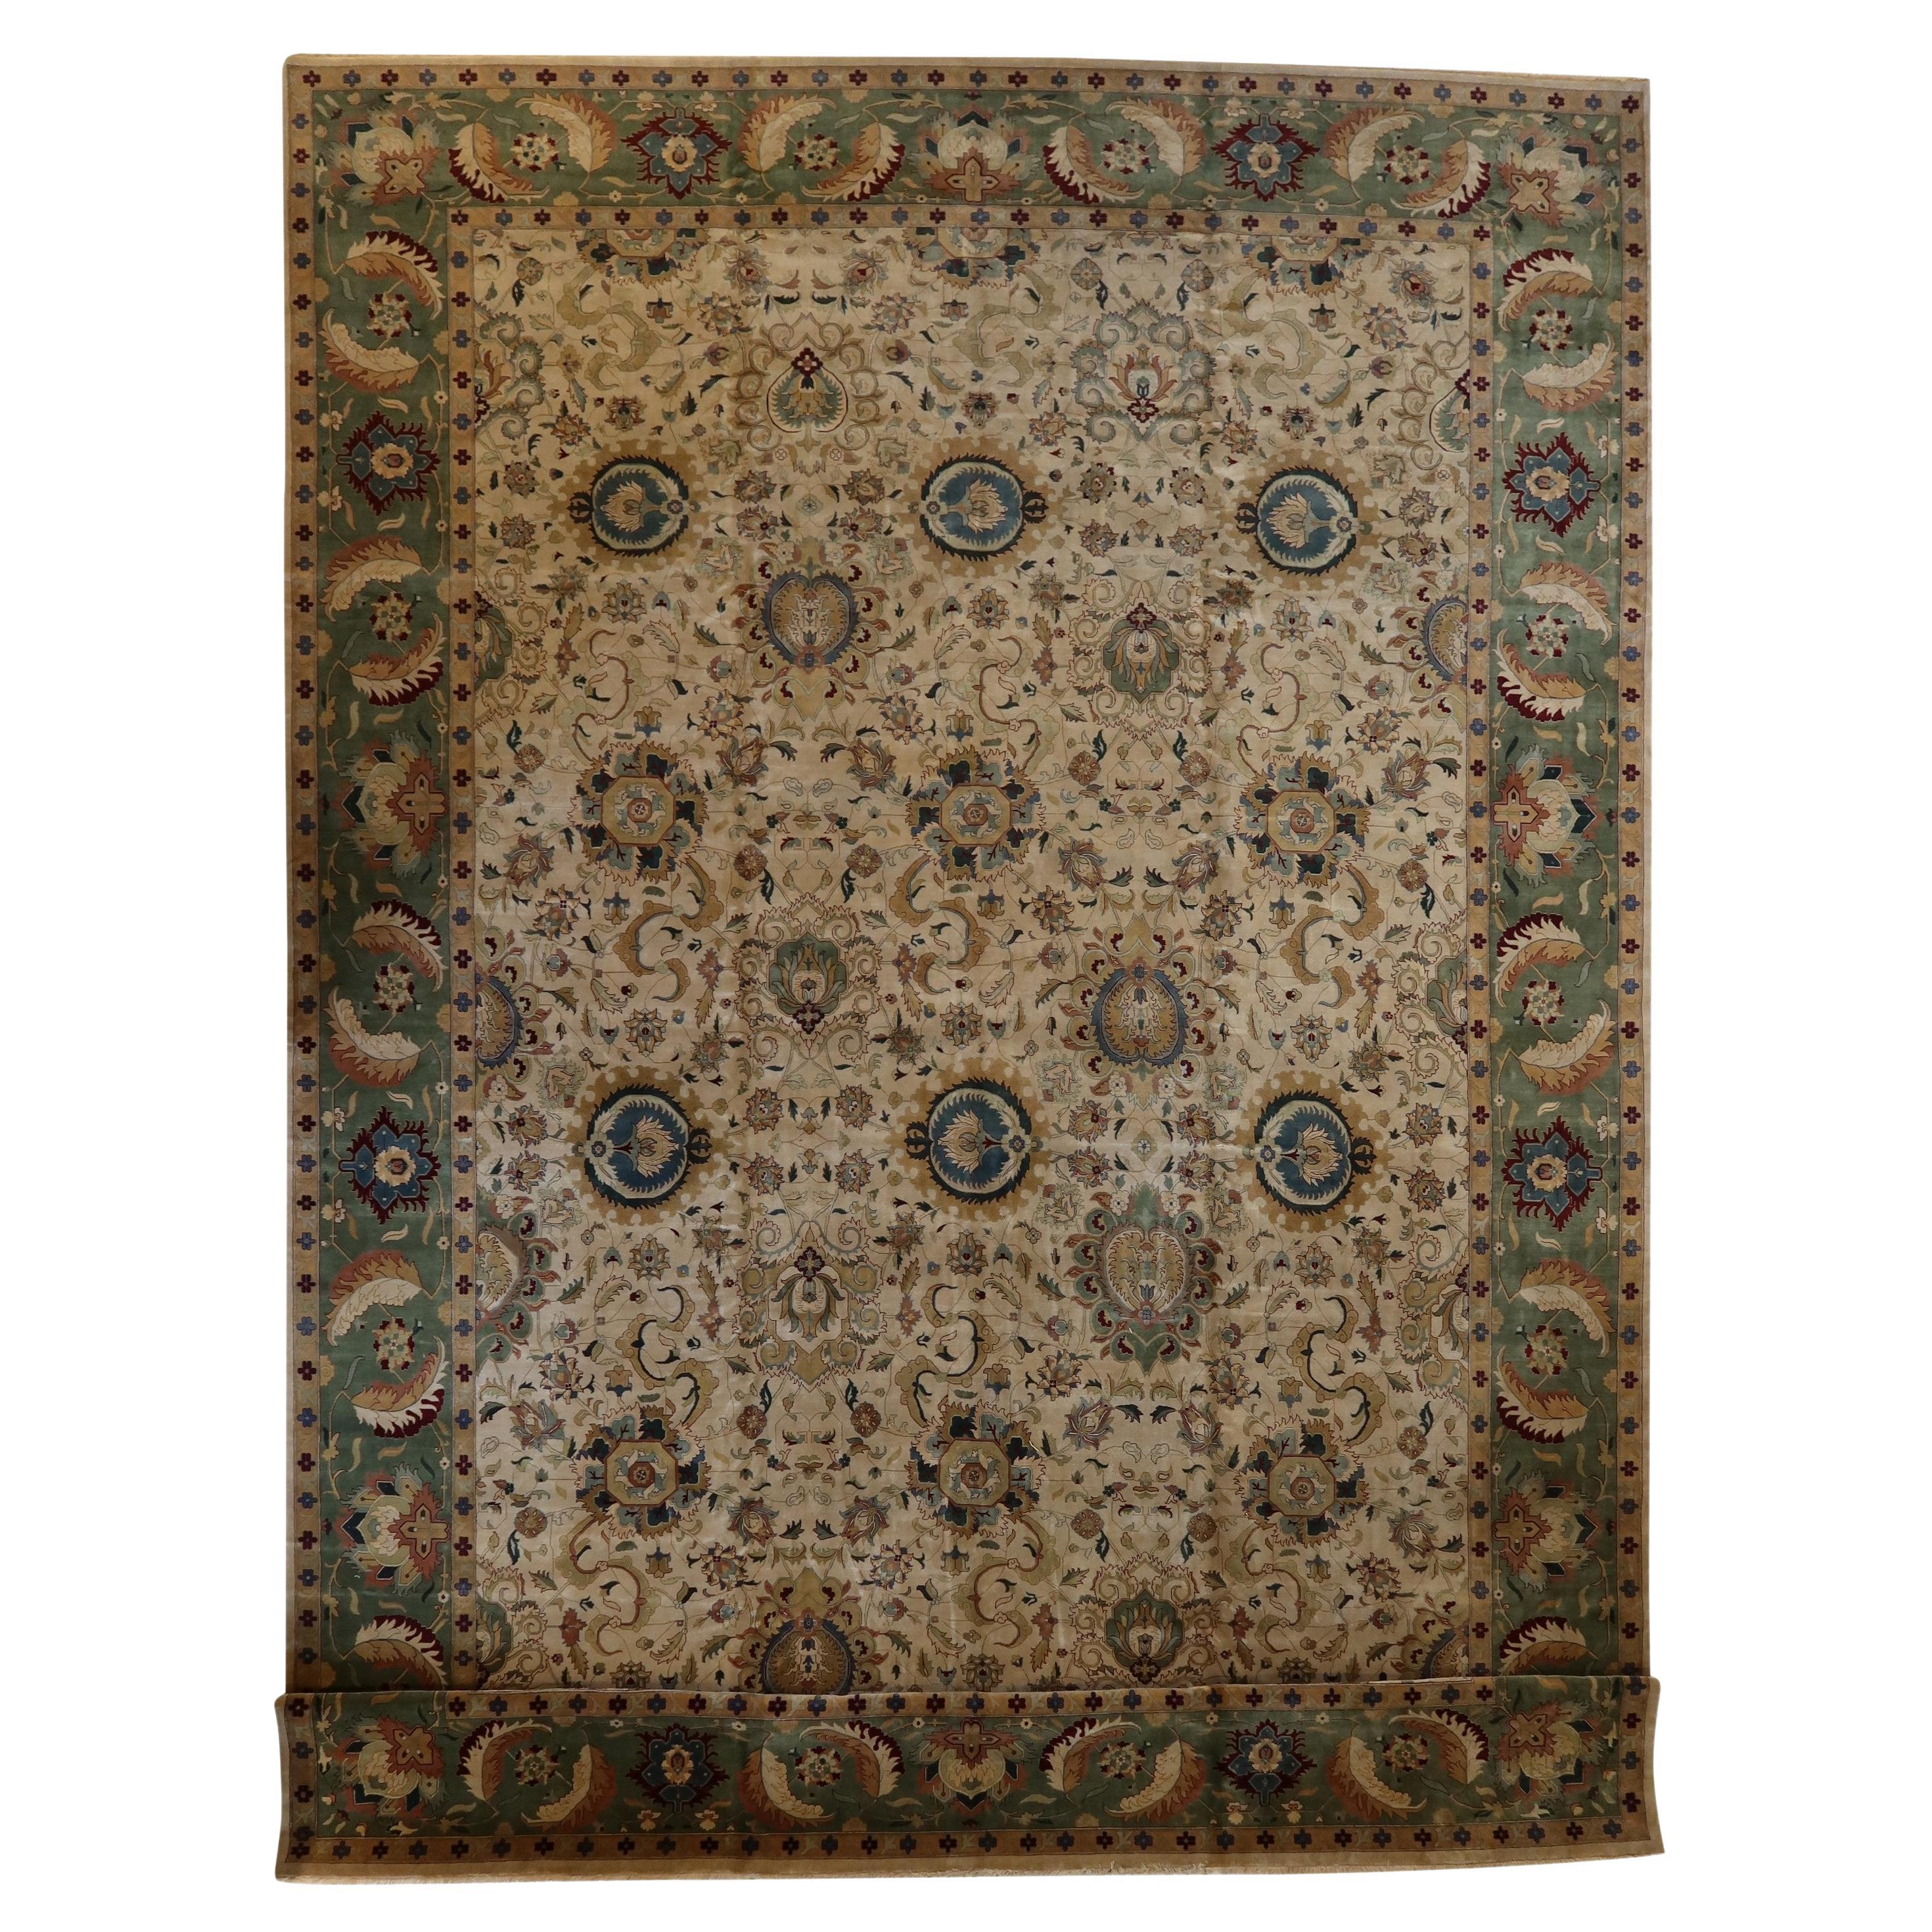 Agra Hand-Knotted New Zealand Wool Vintage Ivory Green Finely Woven Oversize Rug